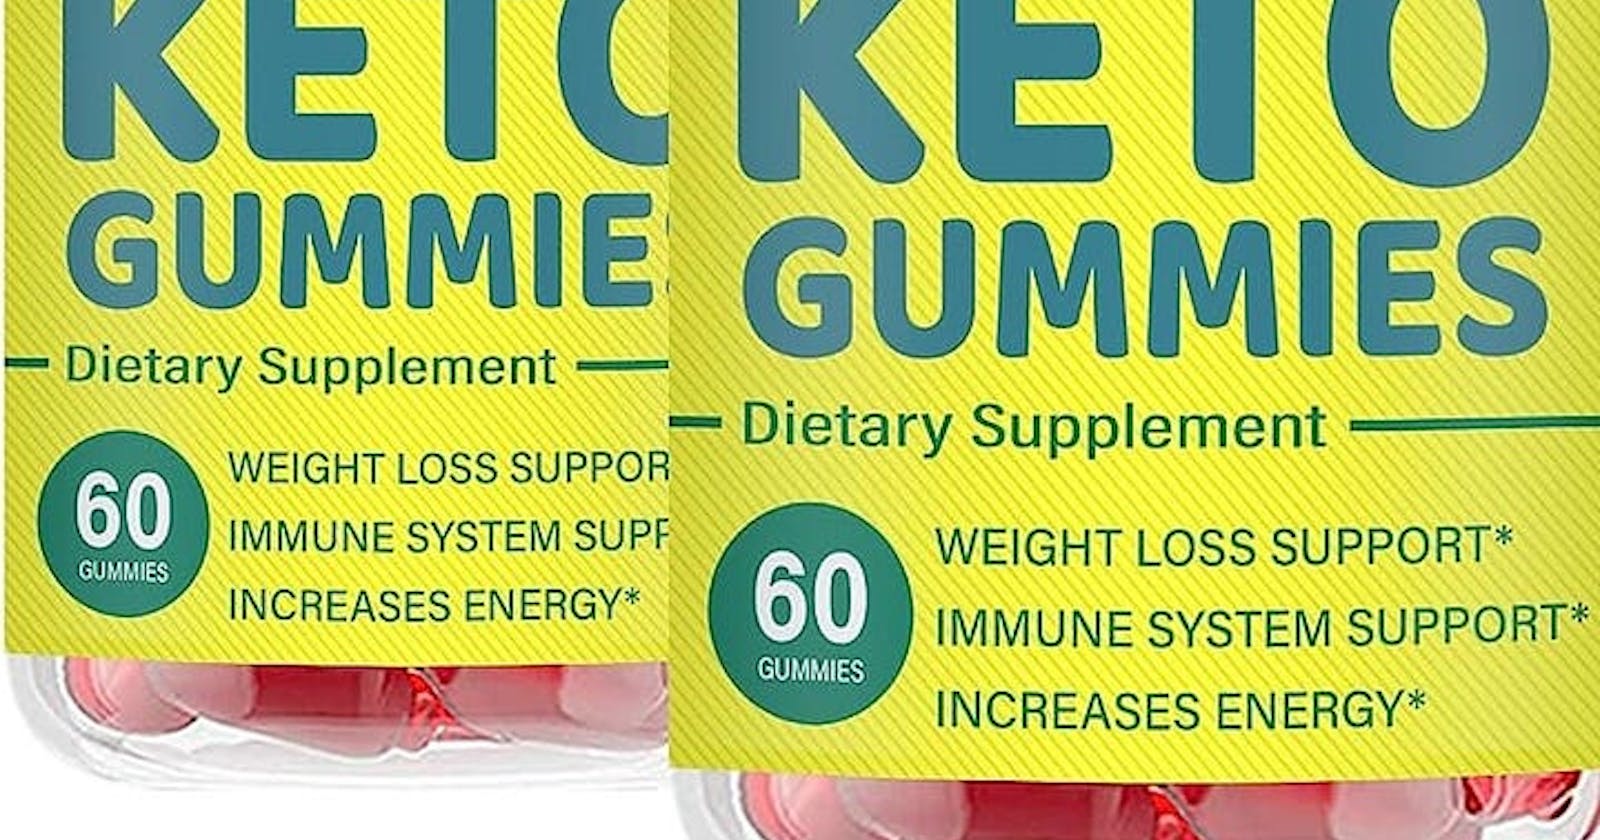 Lifesource Keto Gummies Reviews – Complete Ripoff or Keto Pills That Work?Real Scam Complaints or Legit Diet Pills?